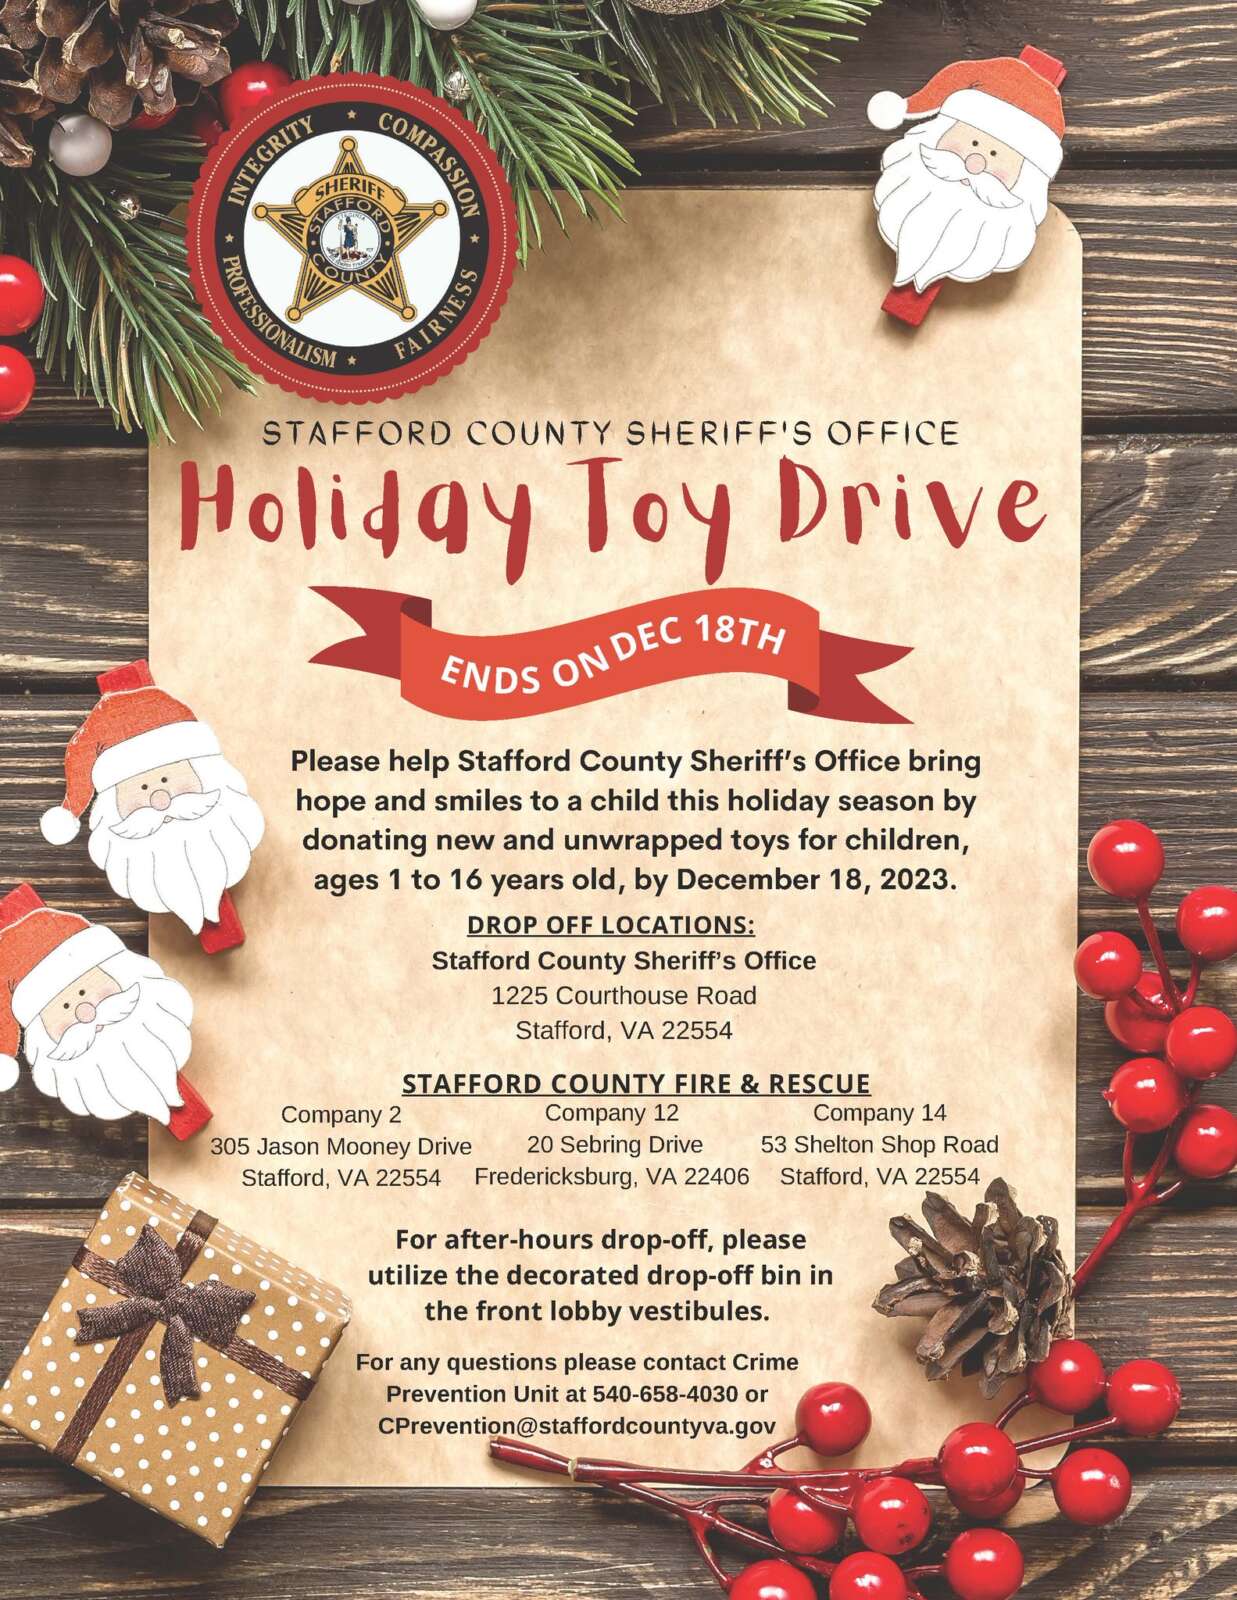 'Join the Stafford County Sheriff's Office for our Holiday Toy Drive'